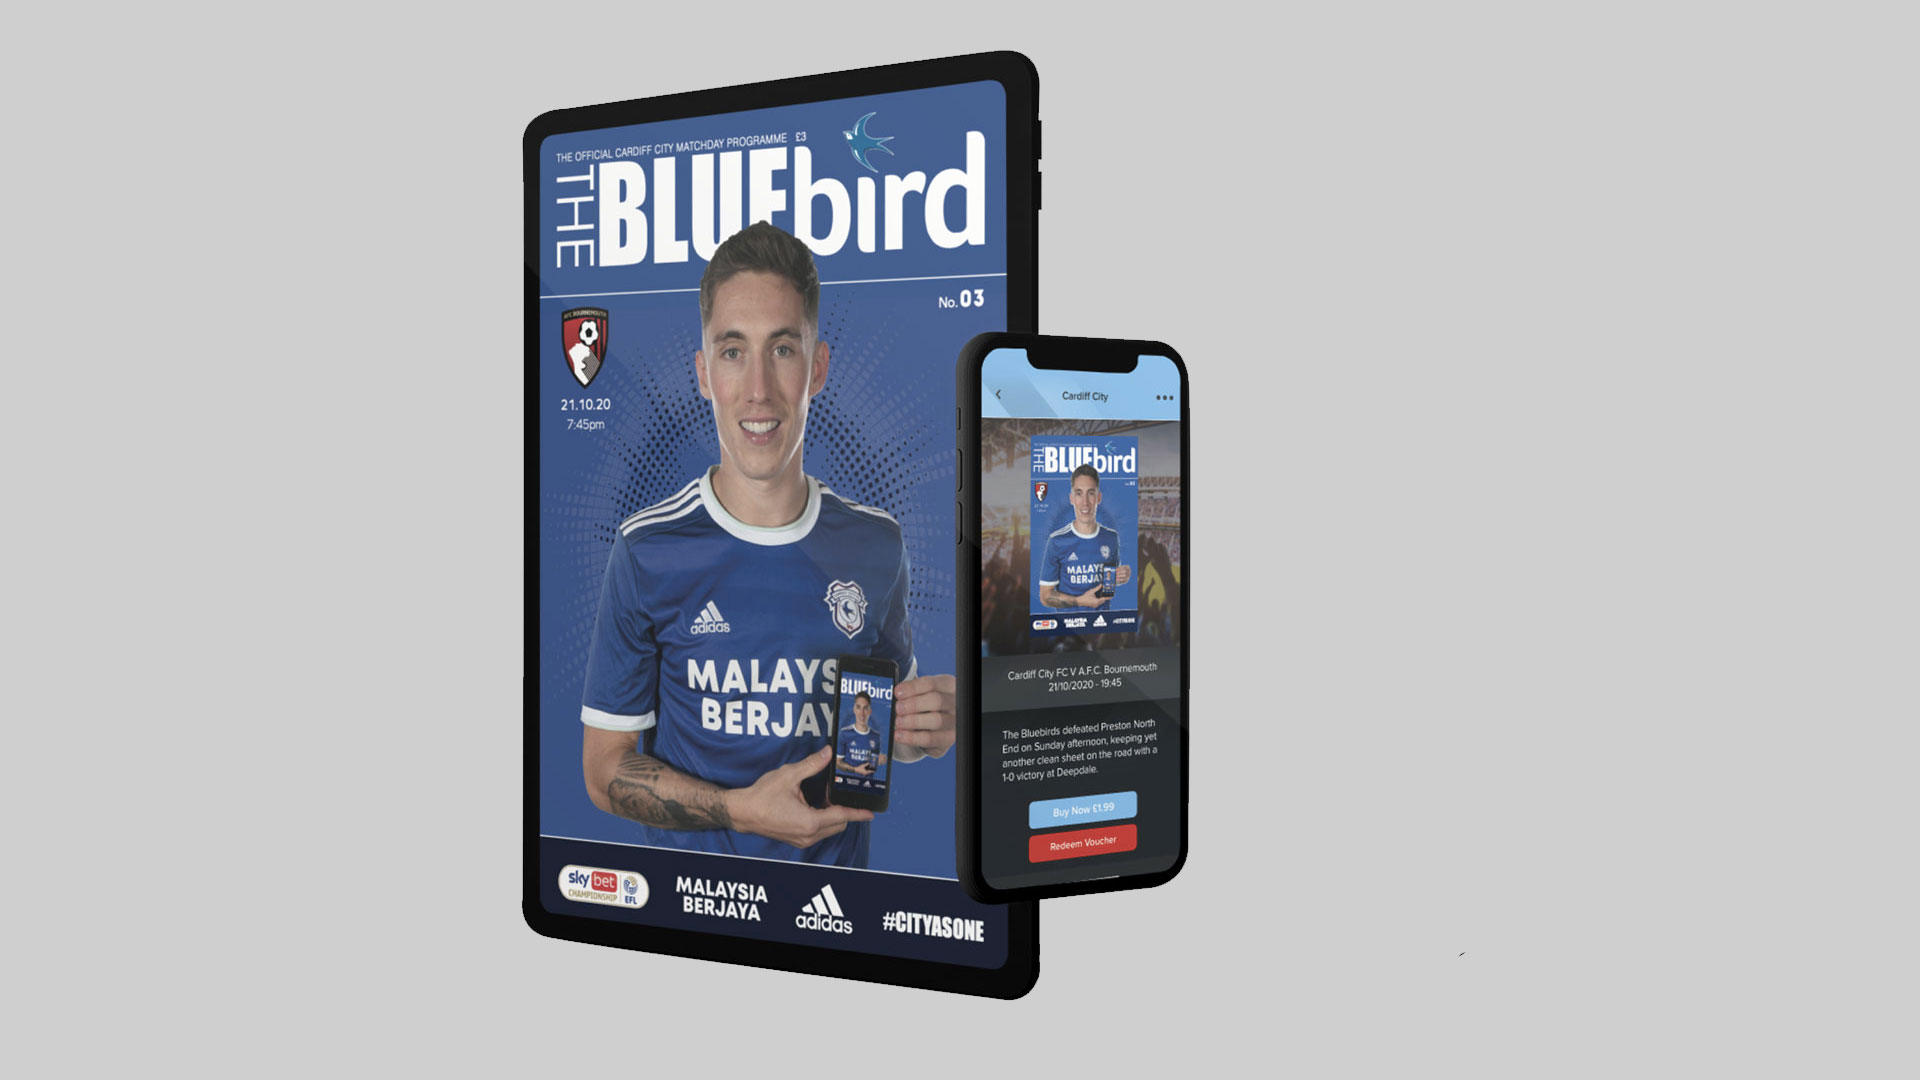 The Bluebird is now available to be downloaded...